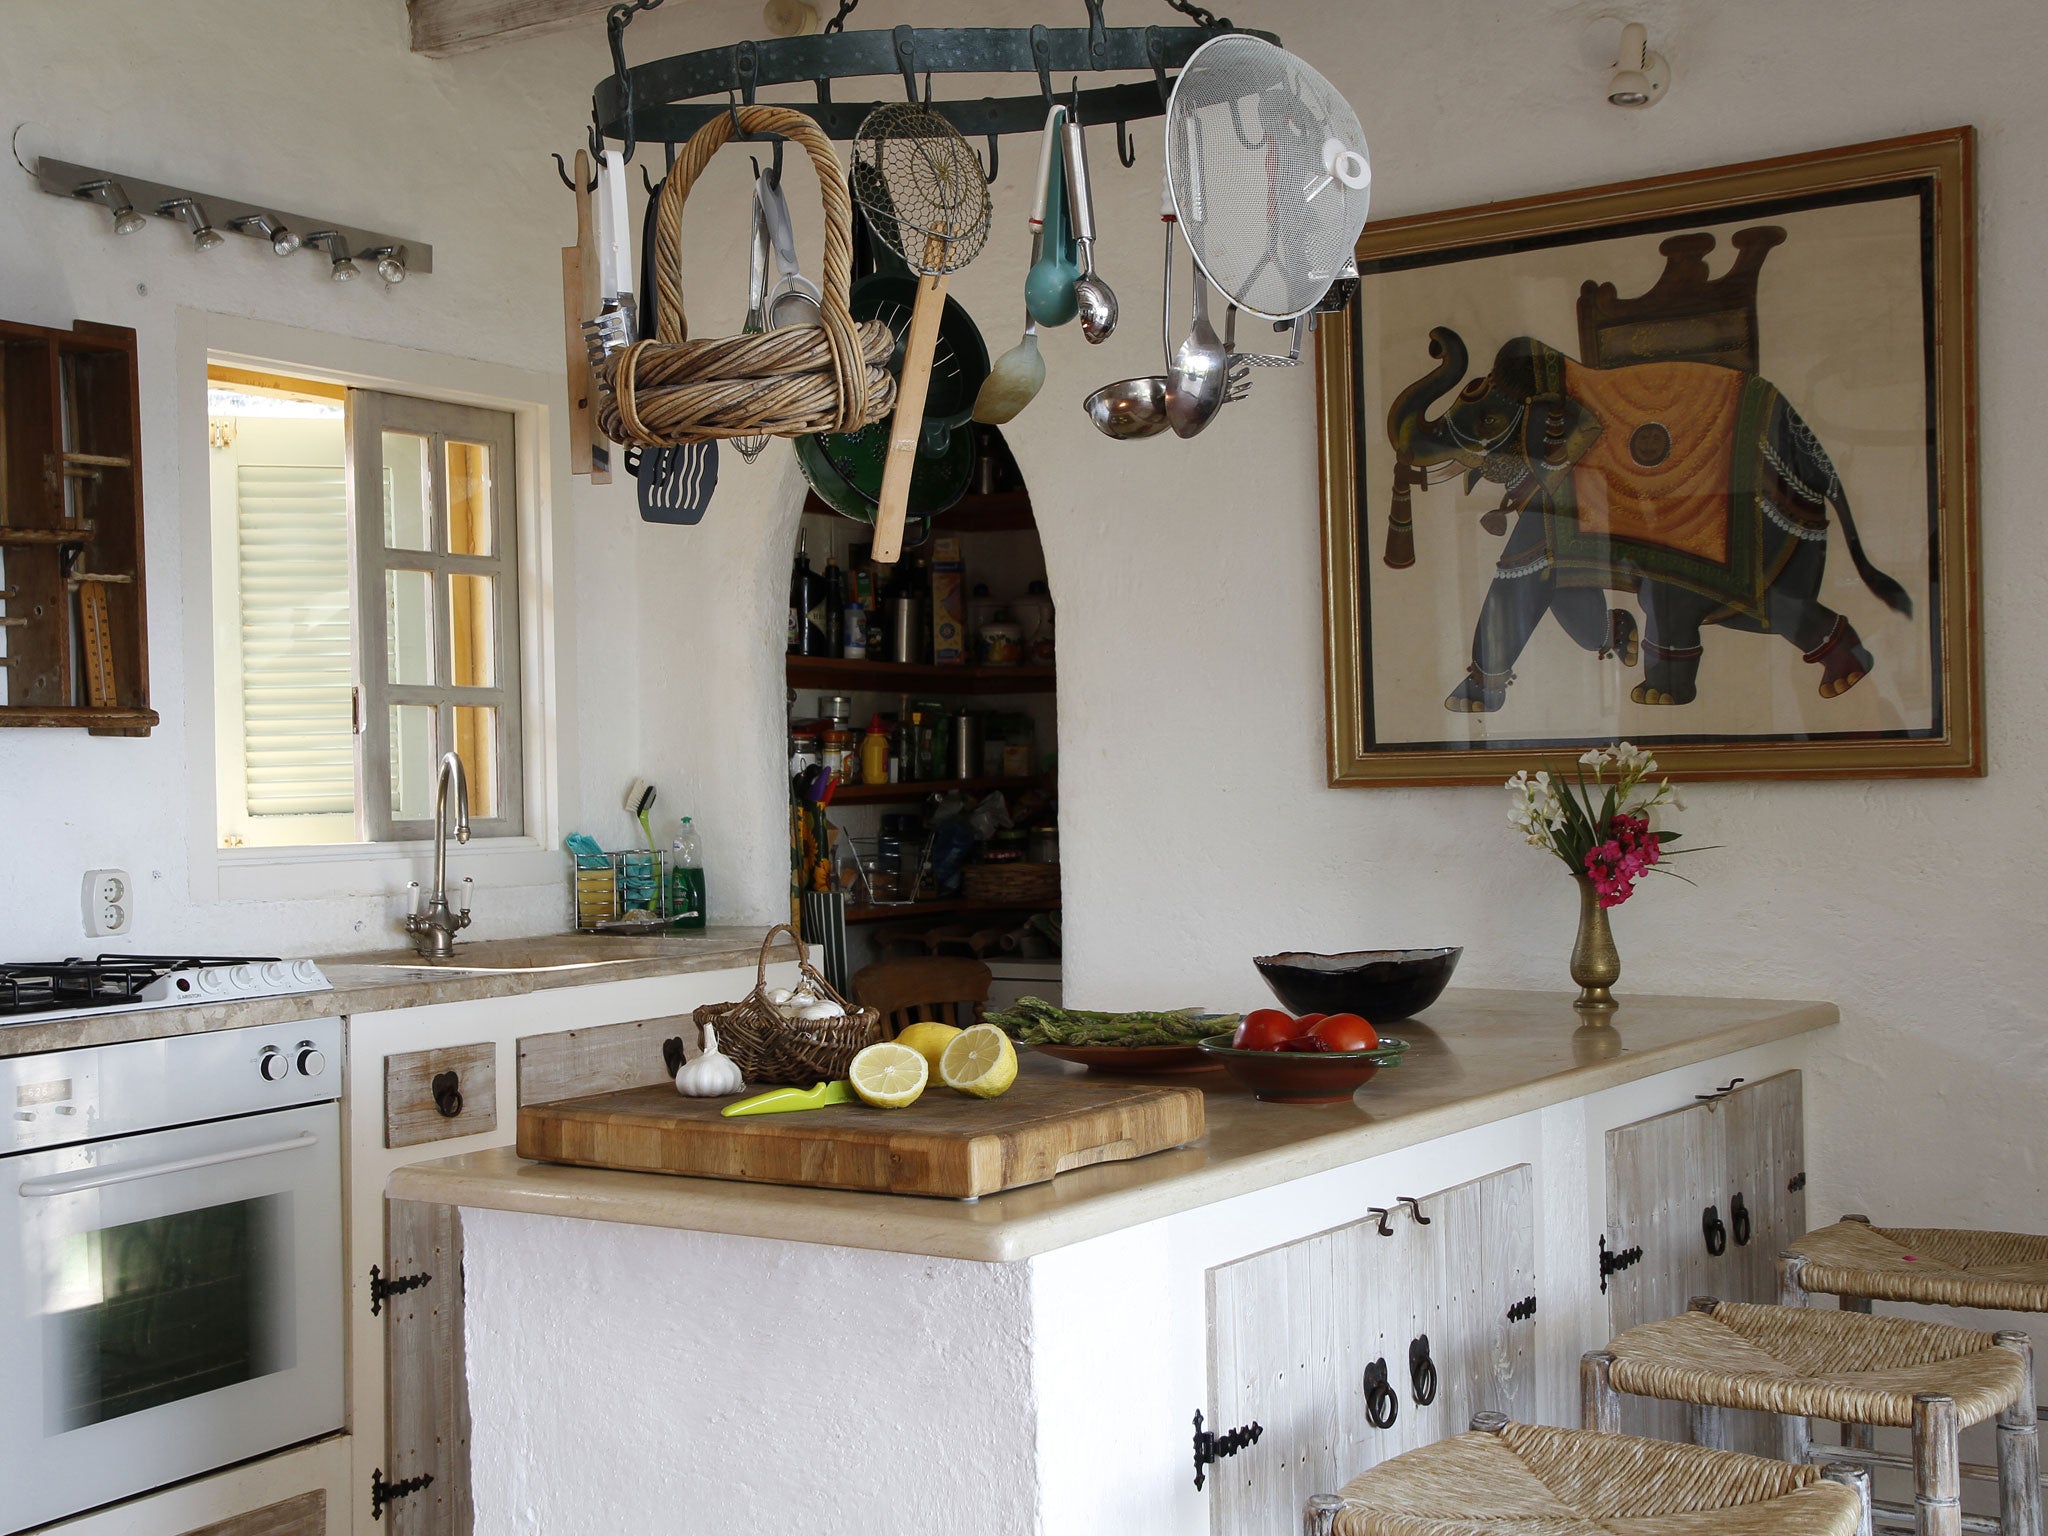 The rustic-chic kitchen